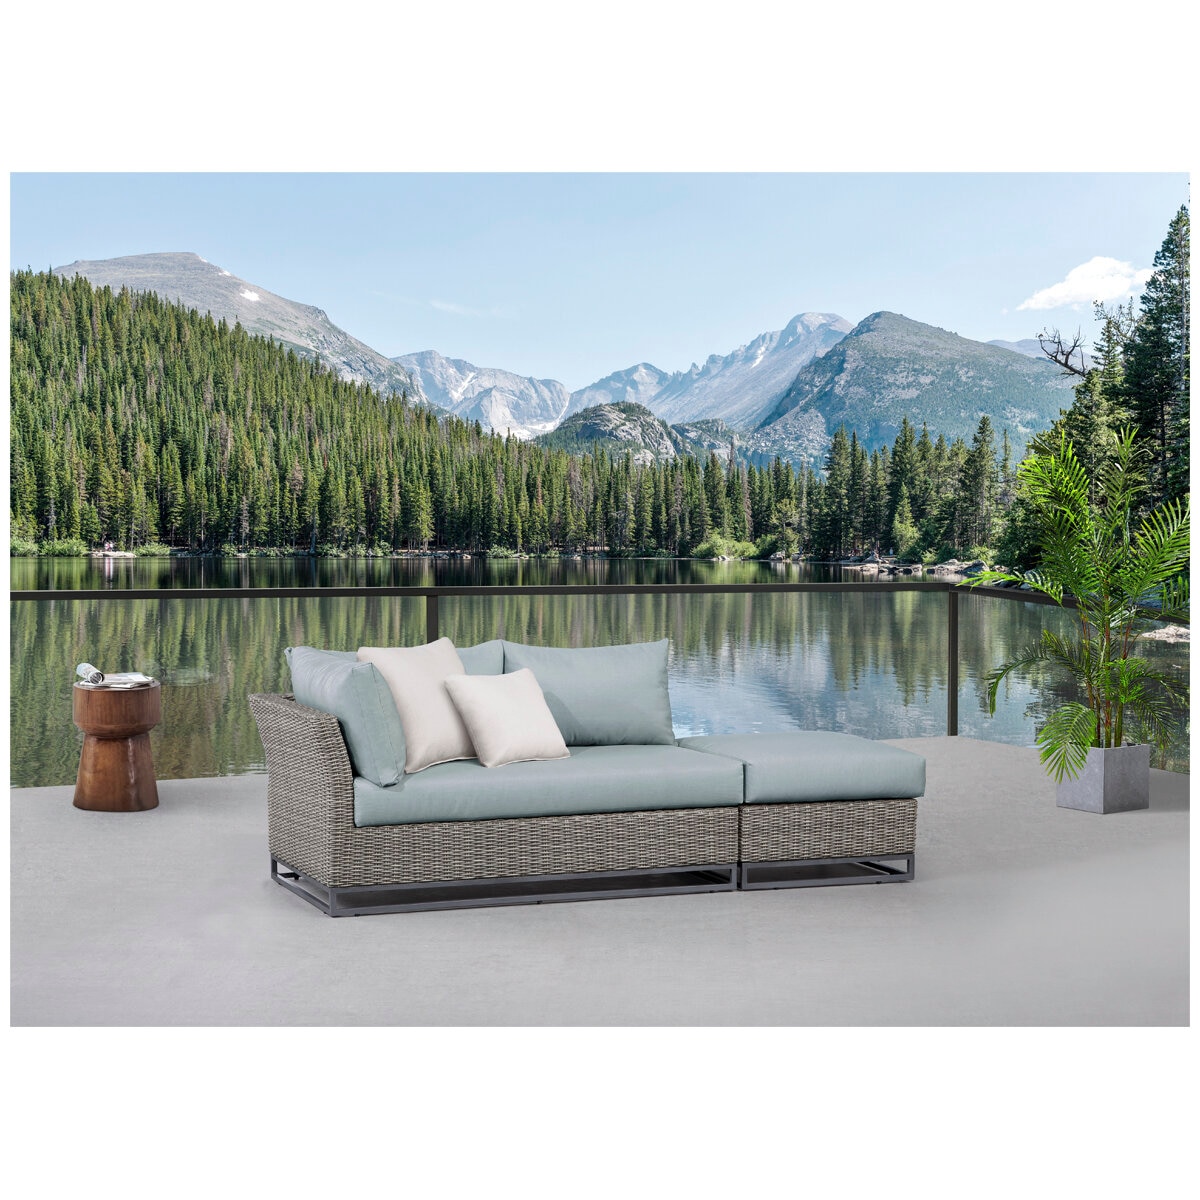 Ove Torrance 4pc Sectional Set